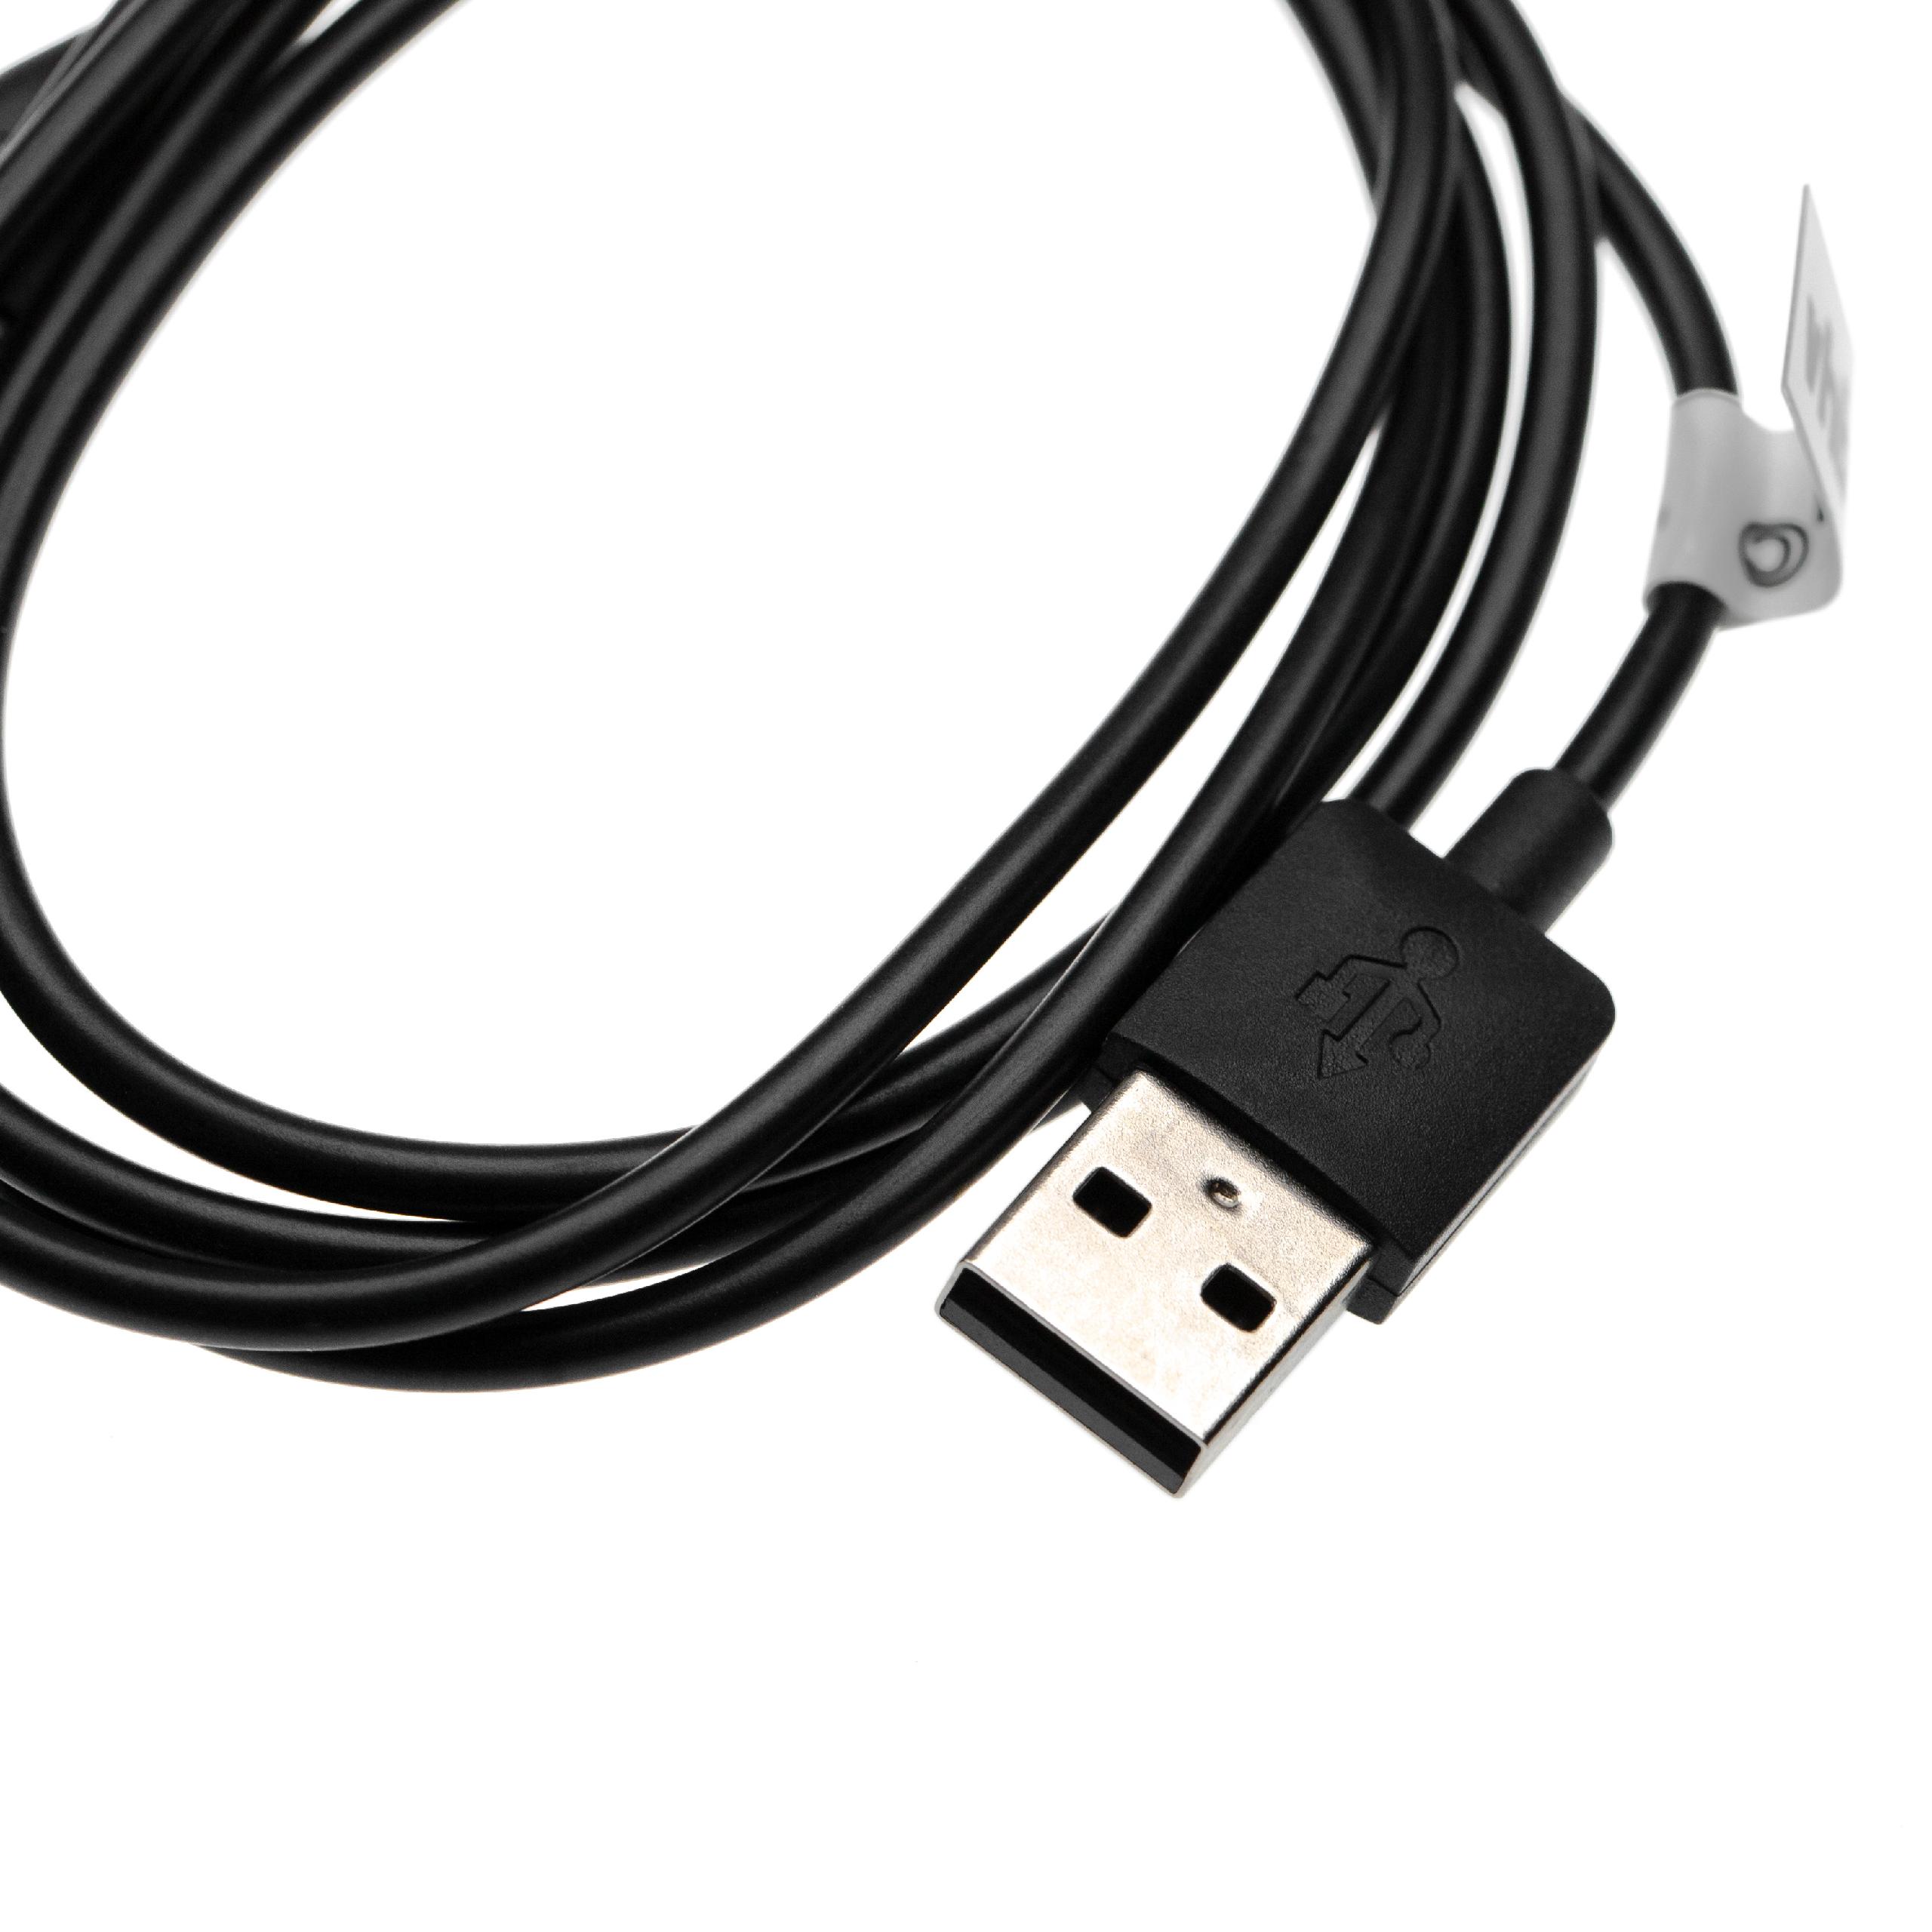 Charging Cable suitable for 3 Fitness Tracker - Micro USB Cable, 100cm, black